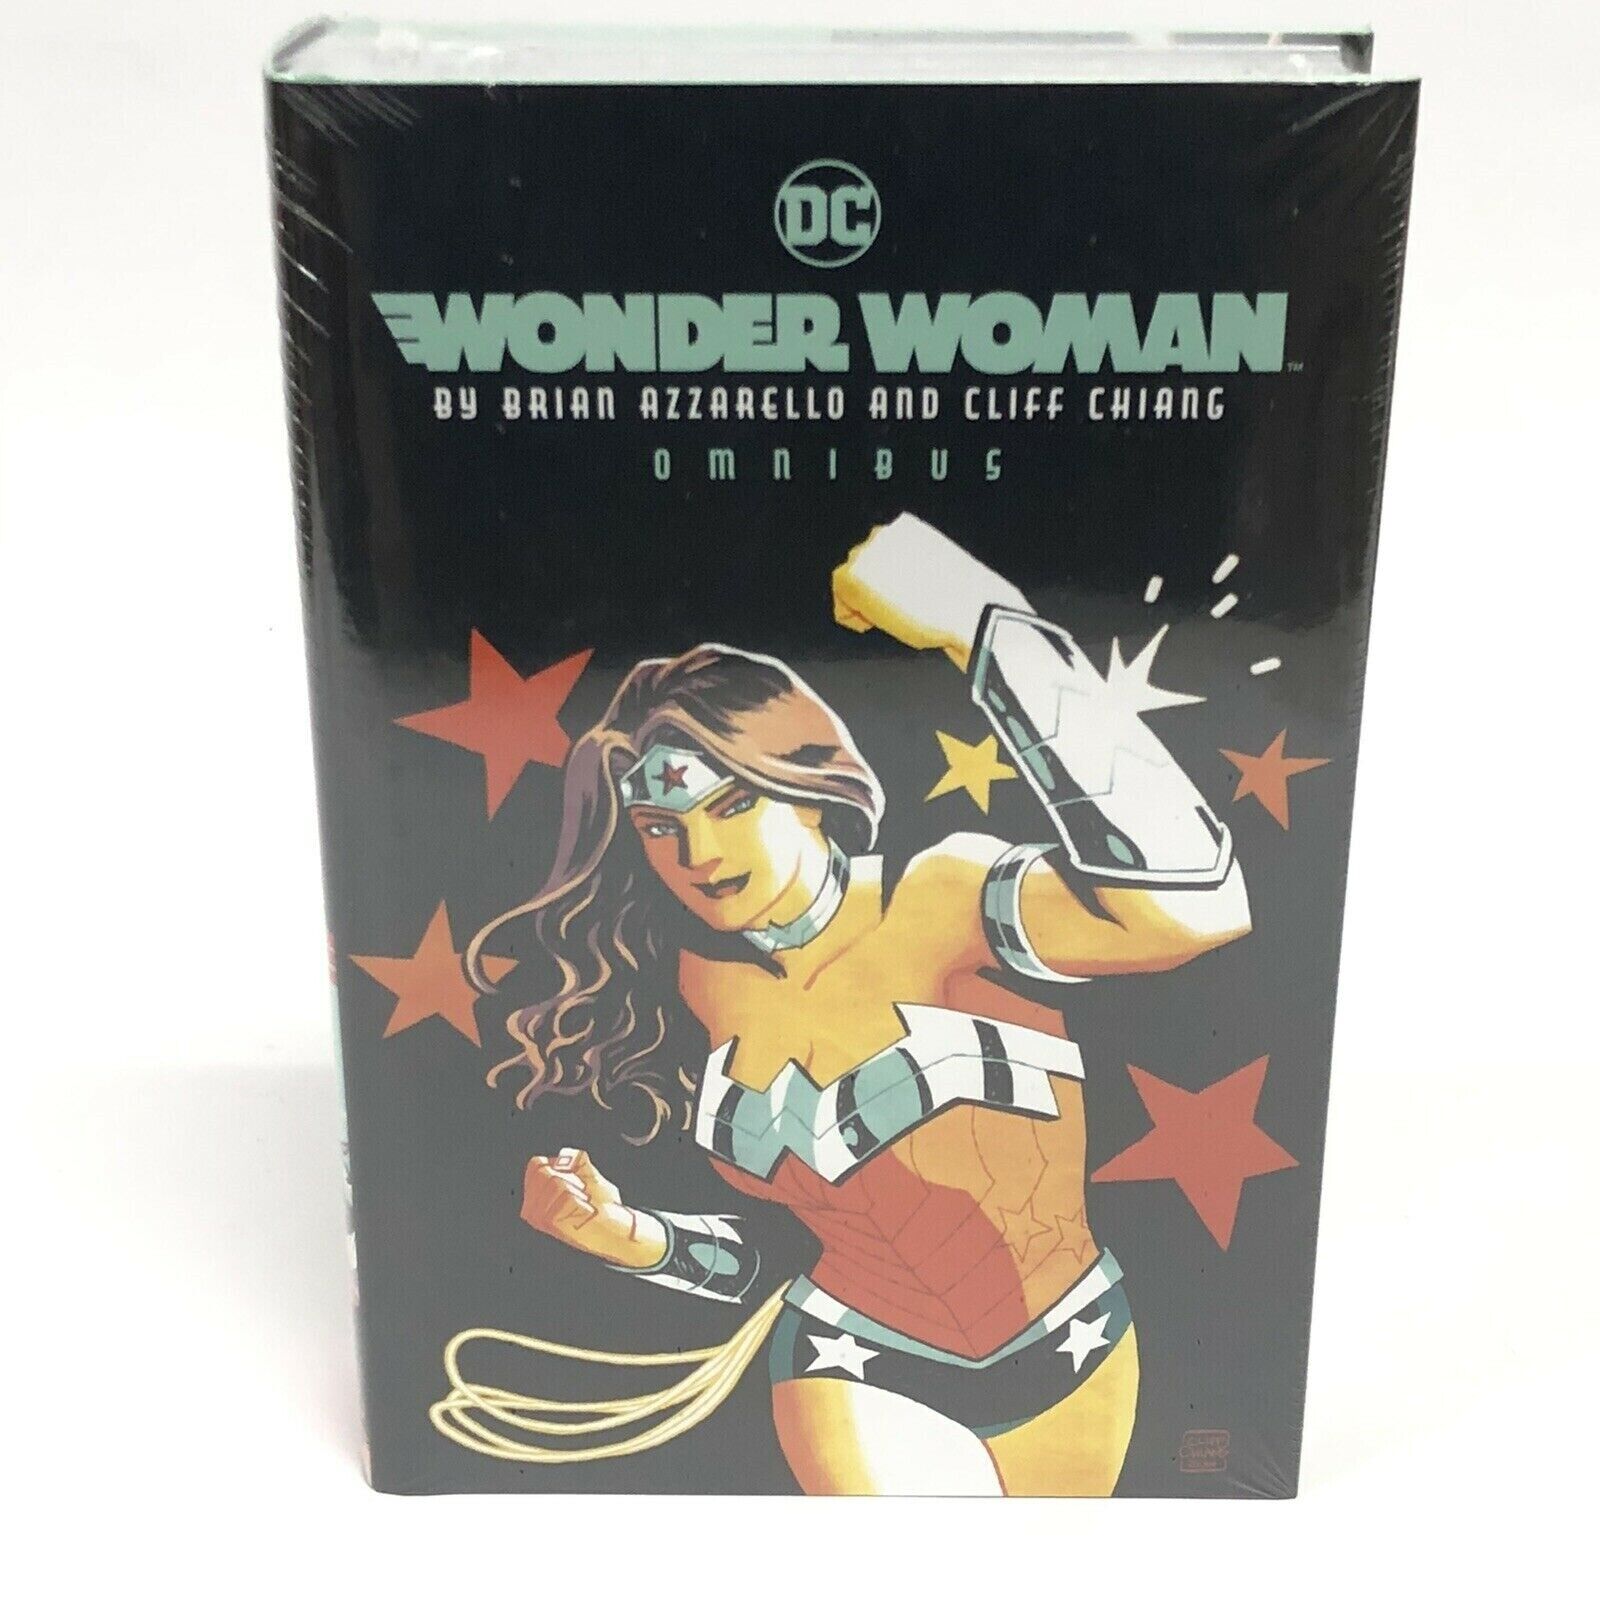 Wonder Woman by Brian Azzarello & Cliff Chiang Omnibus New DC Comics HC Sealed